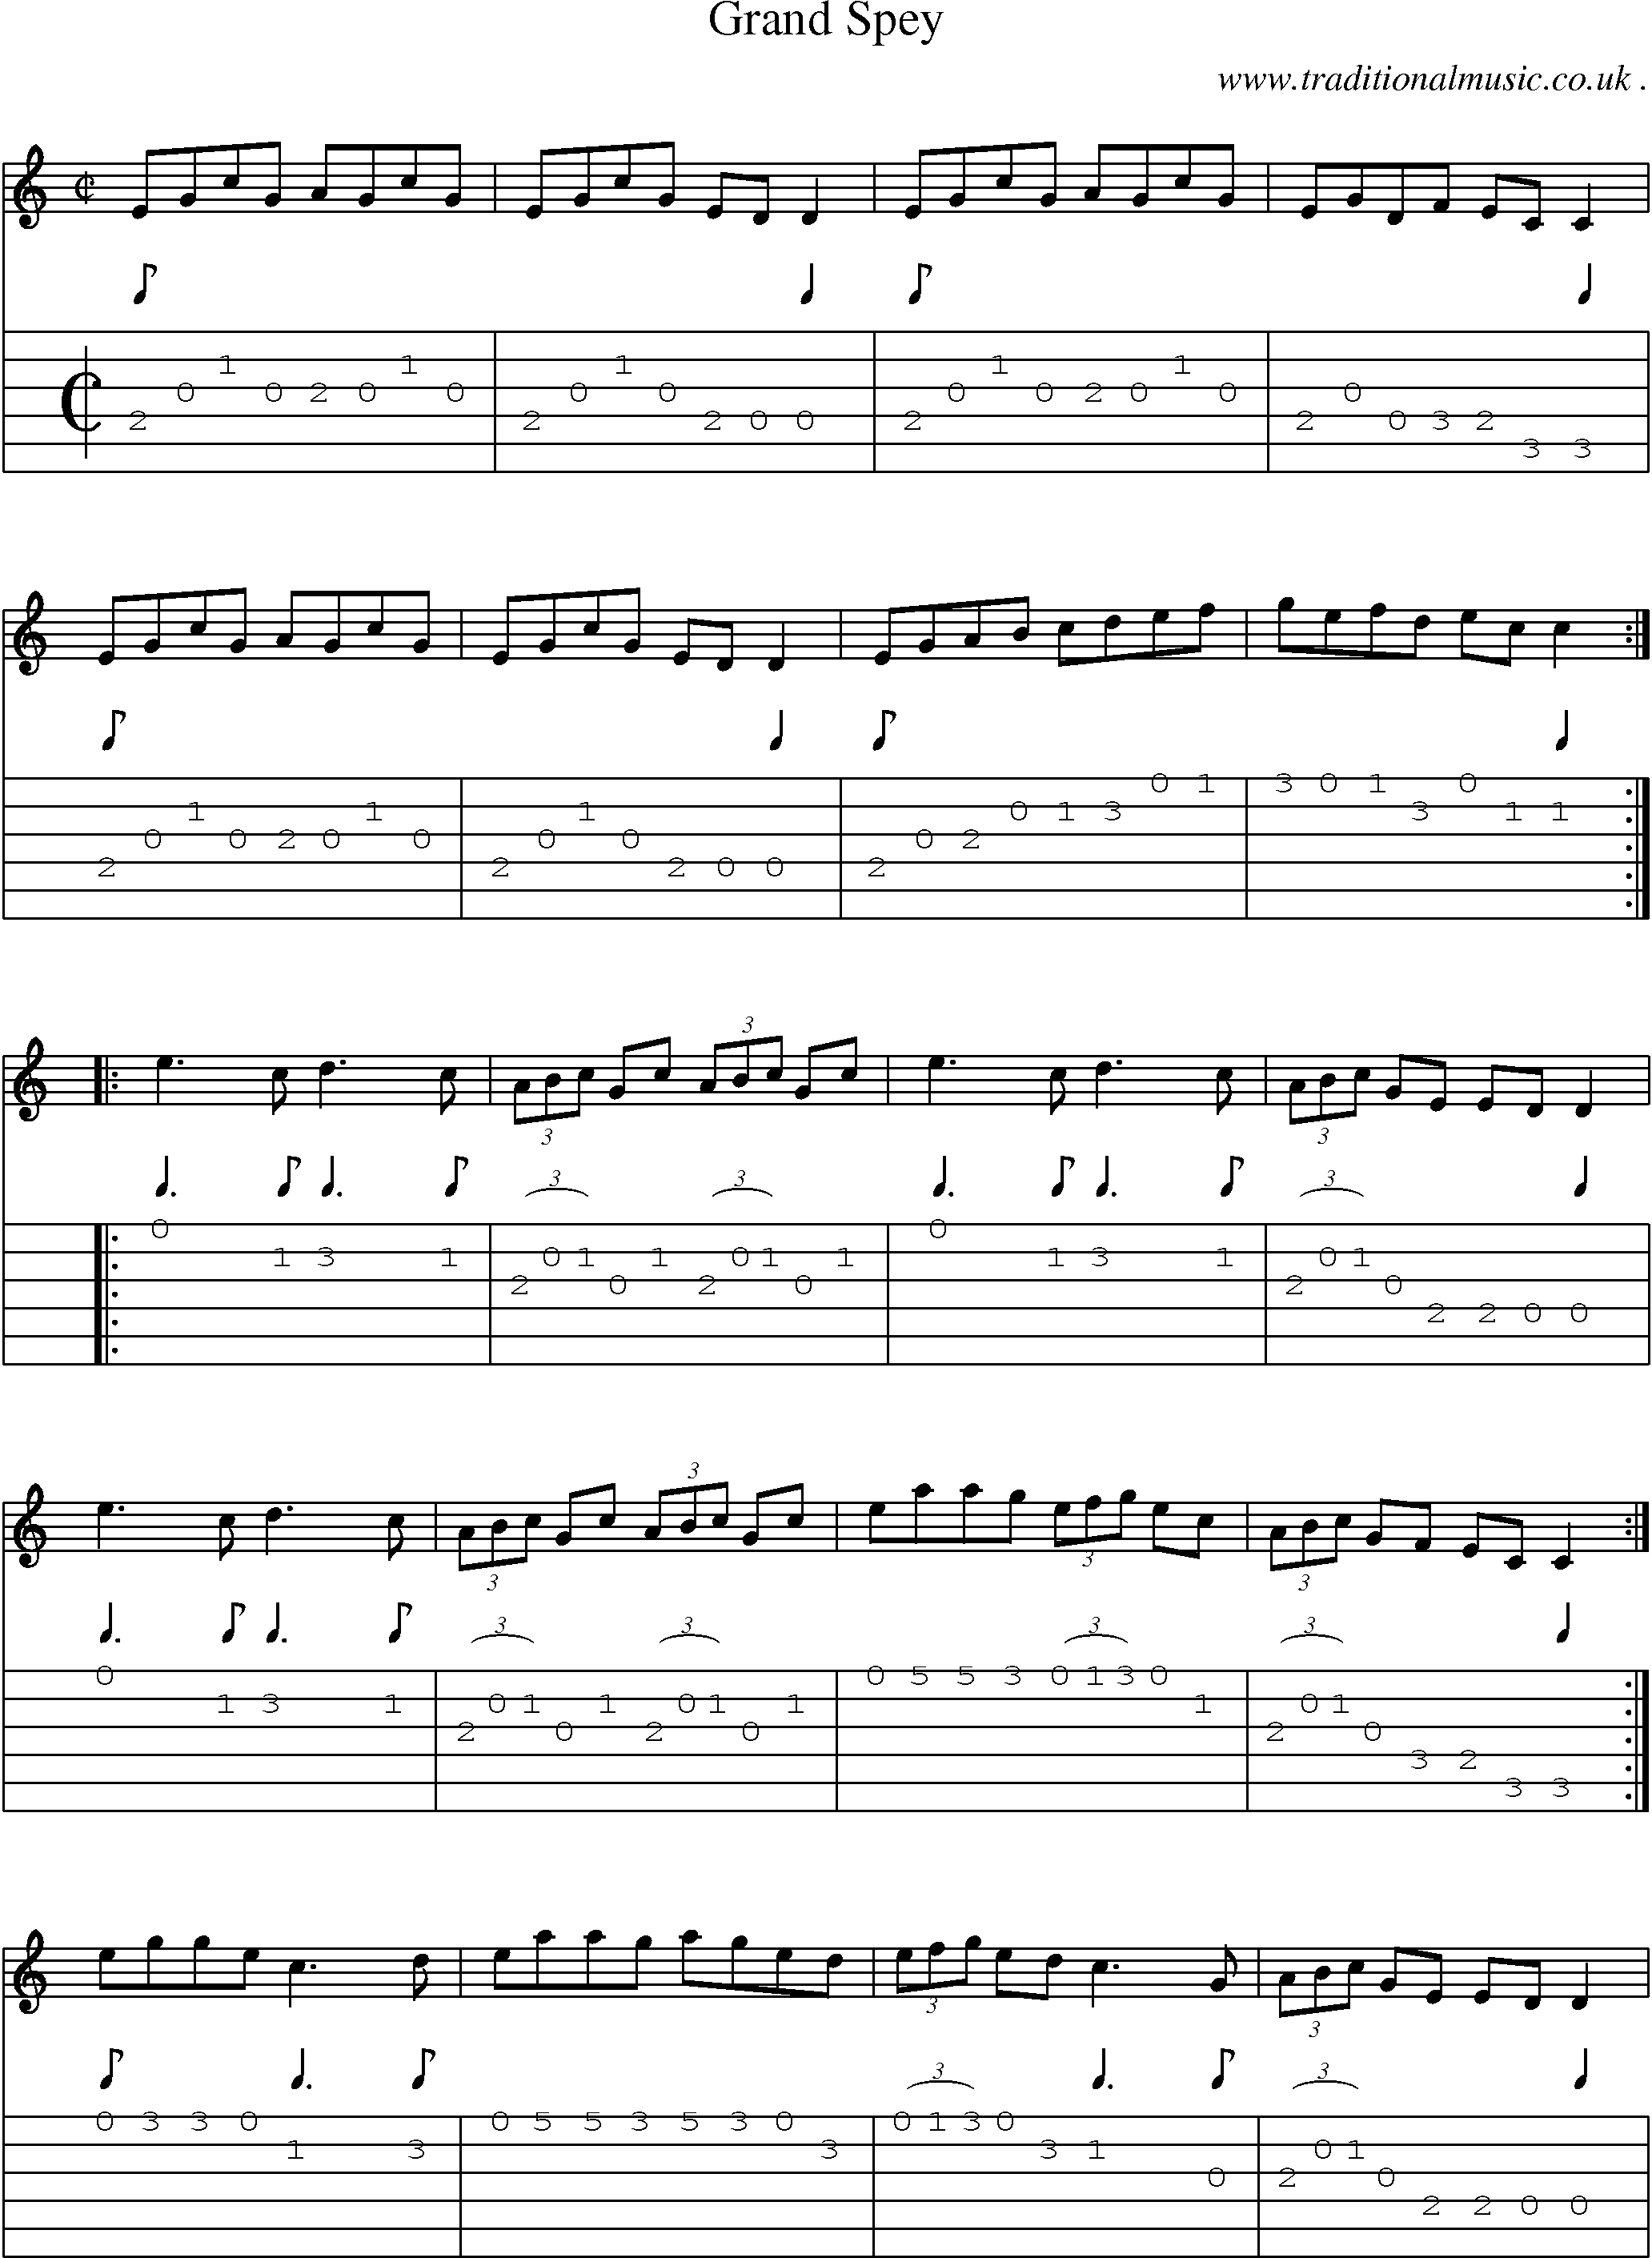 Sheet-Music and Guitar Tabs for Grand Spey